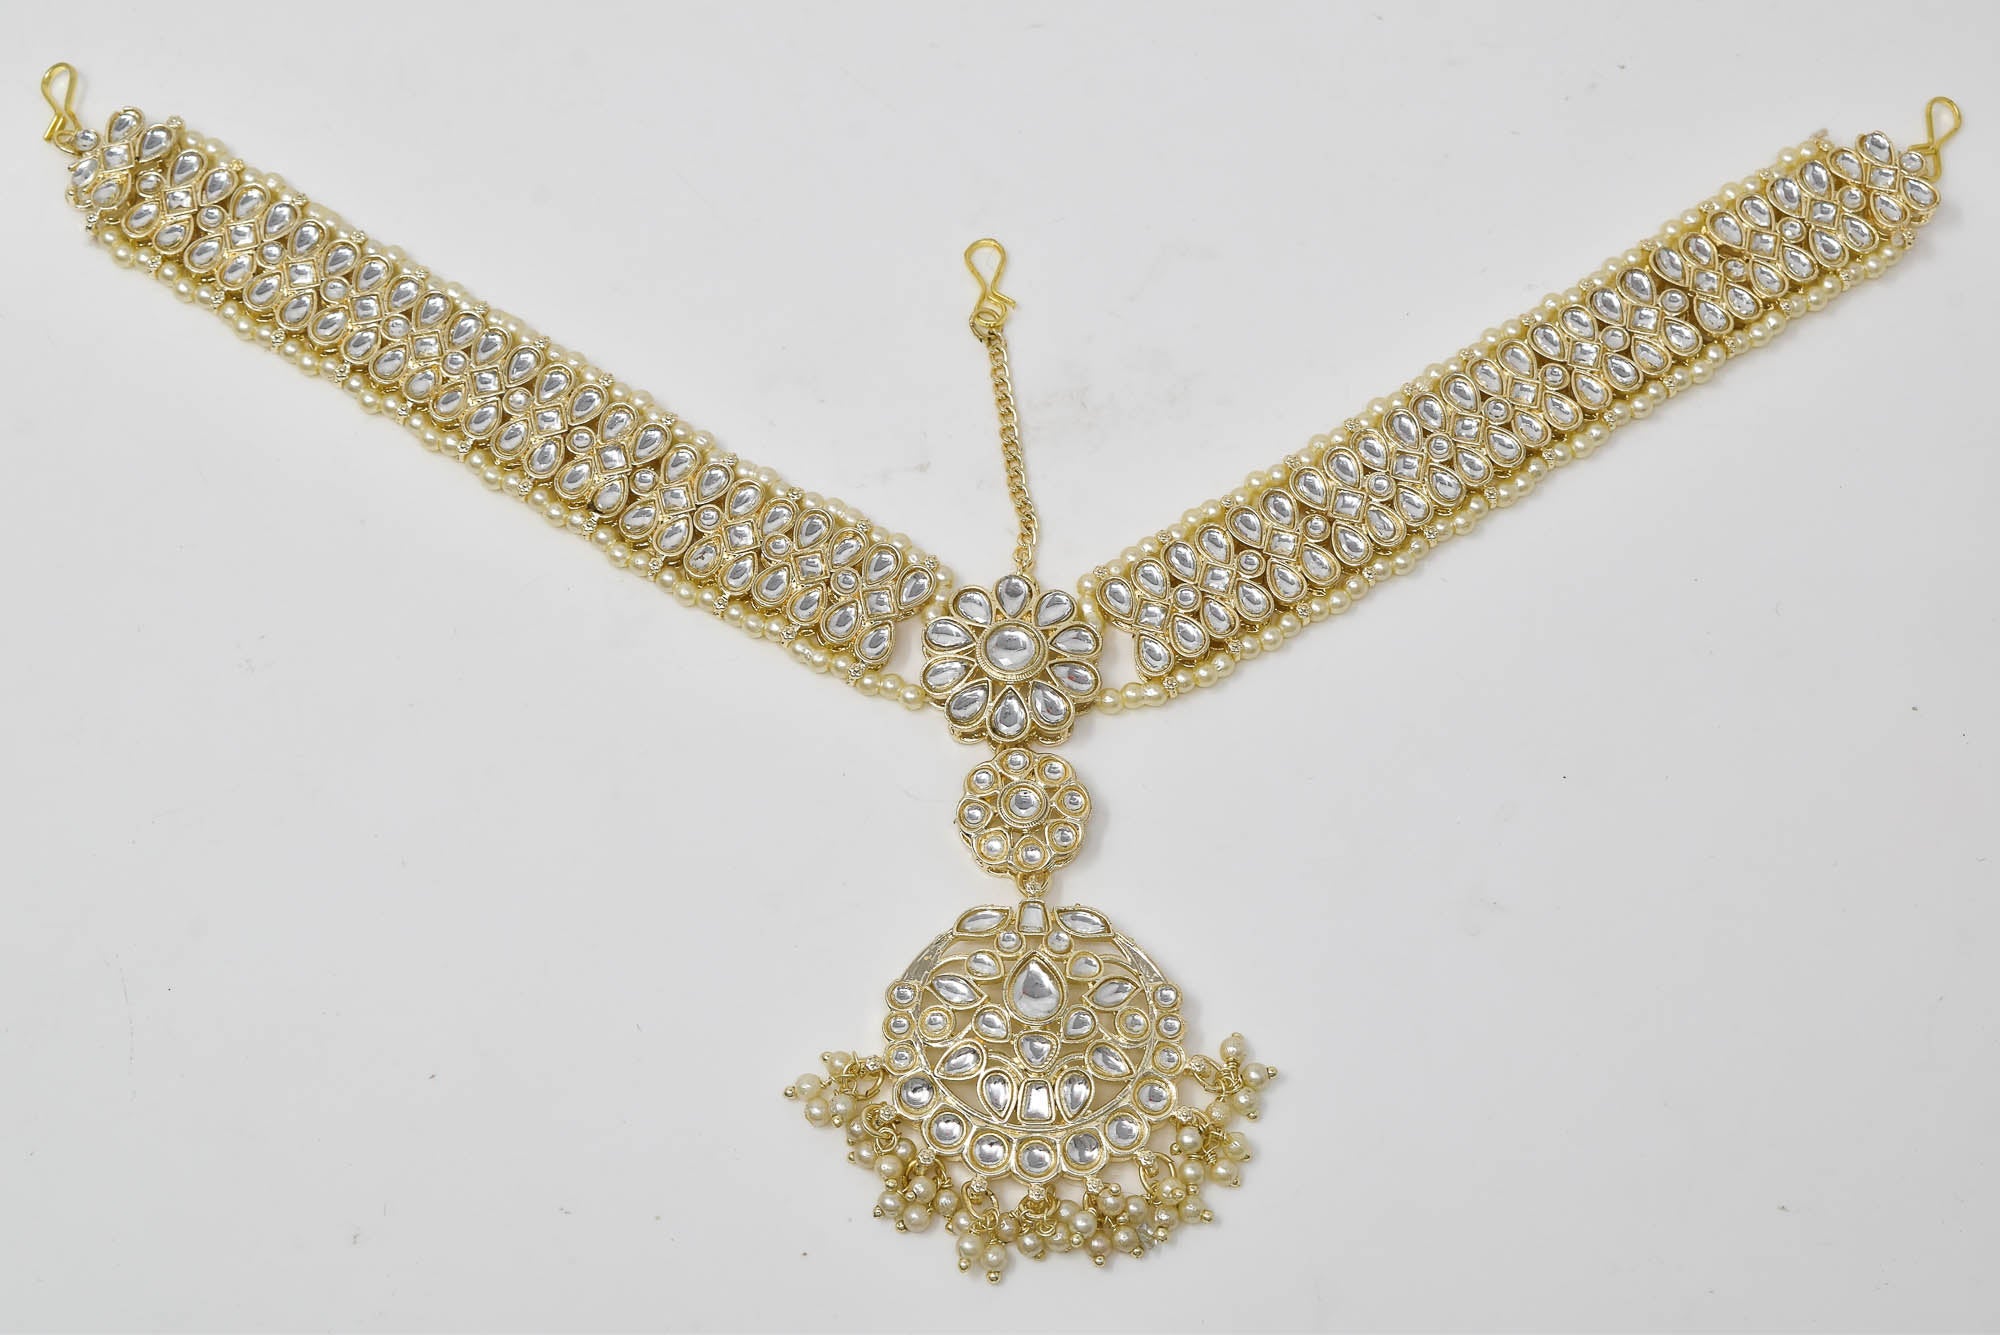 Rajasthani Mathapatti: Traditional Gold & Silver Forehead Ornament with Gemstones